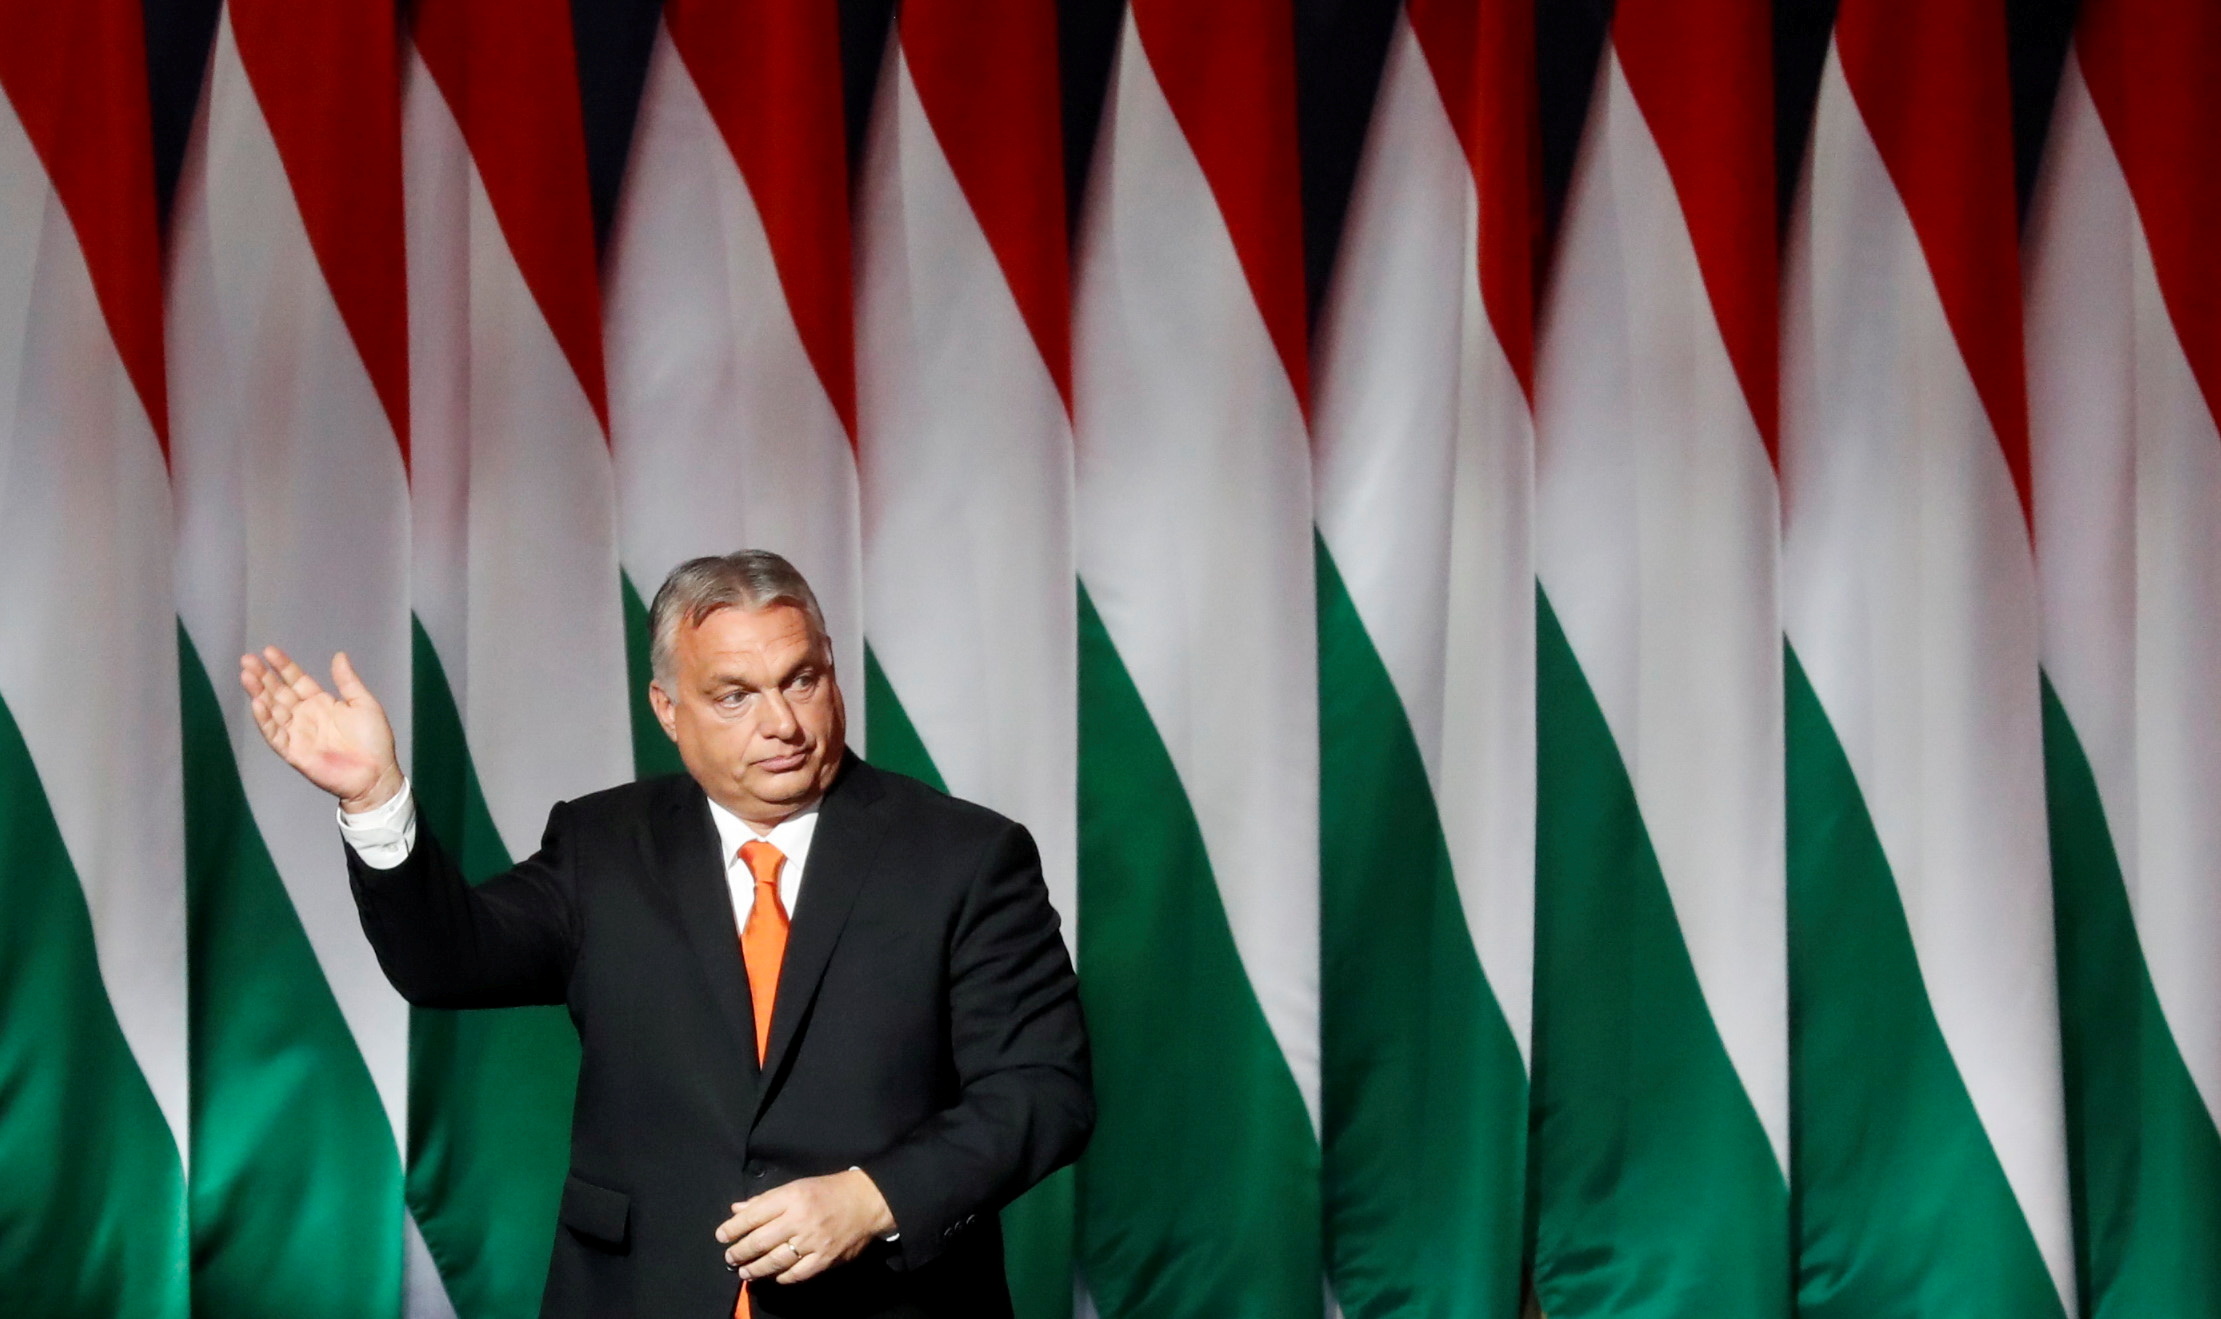 Fidesz party congress in Budapest